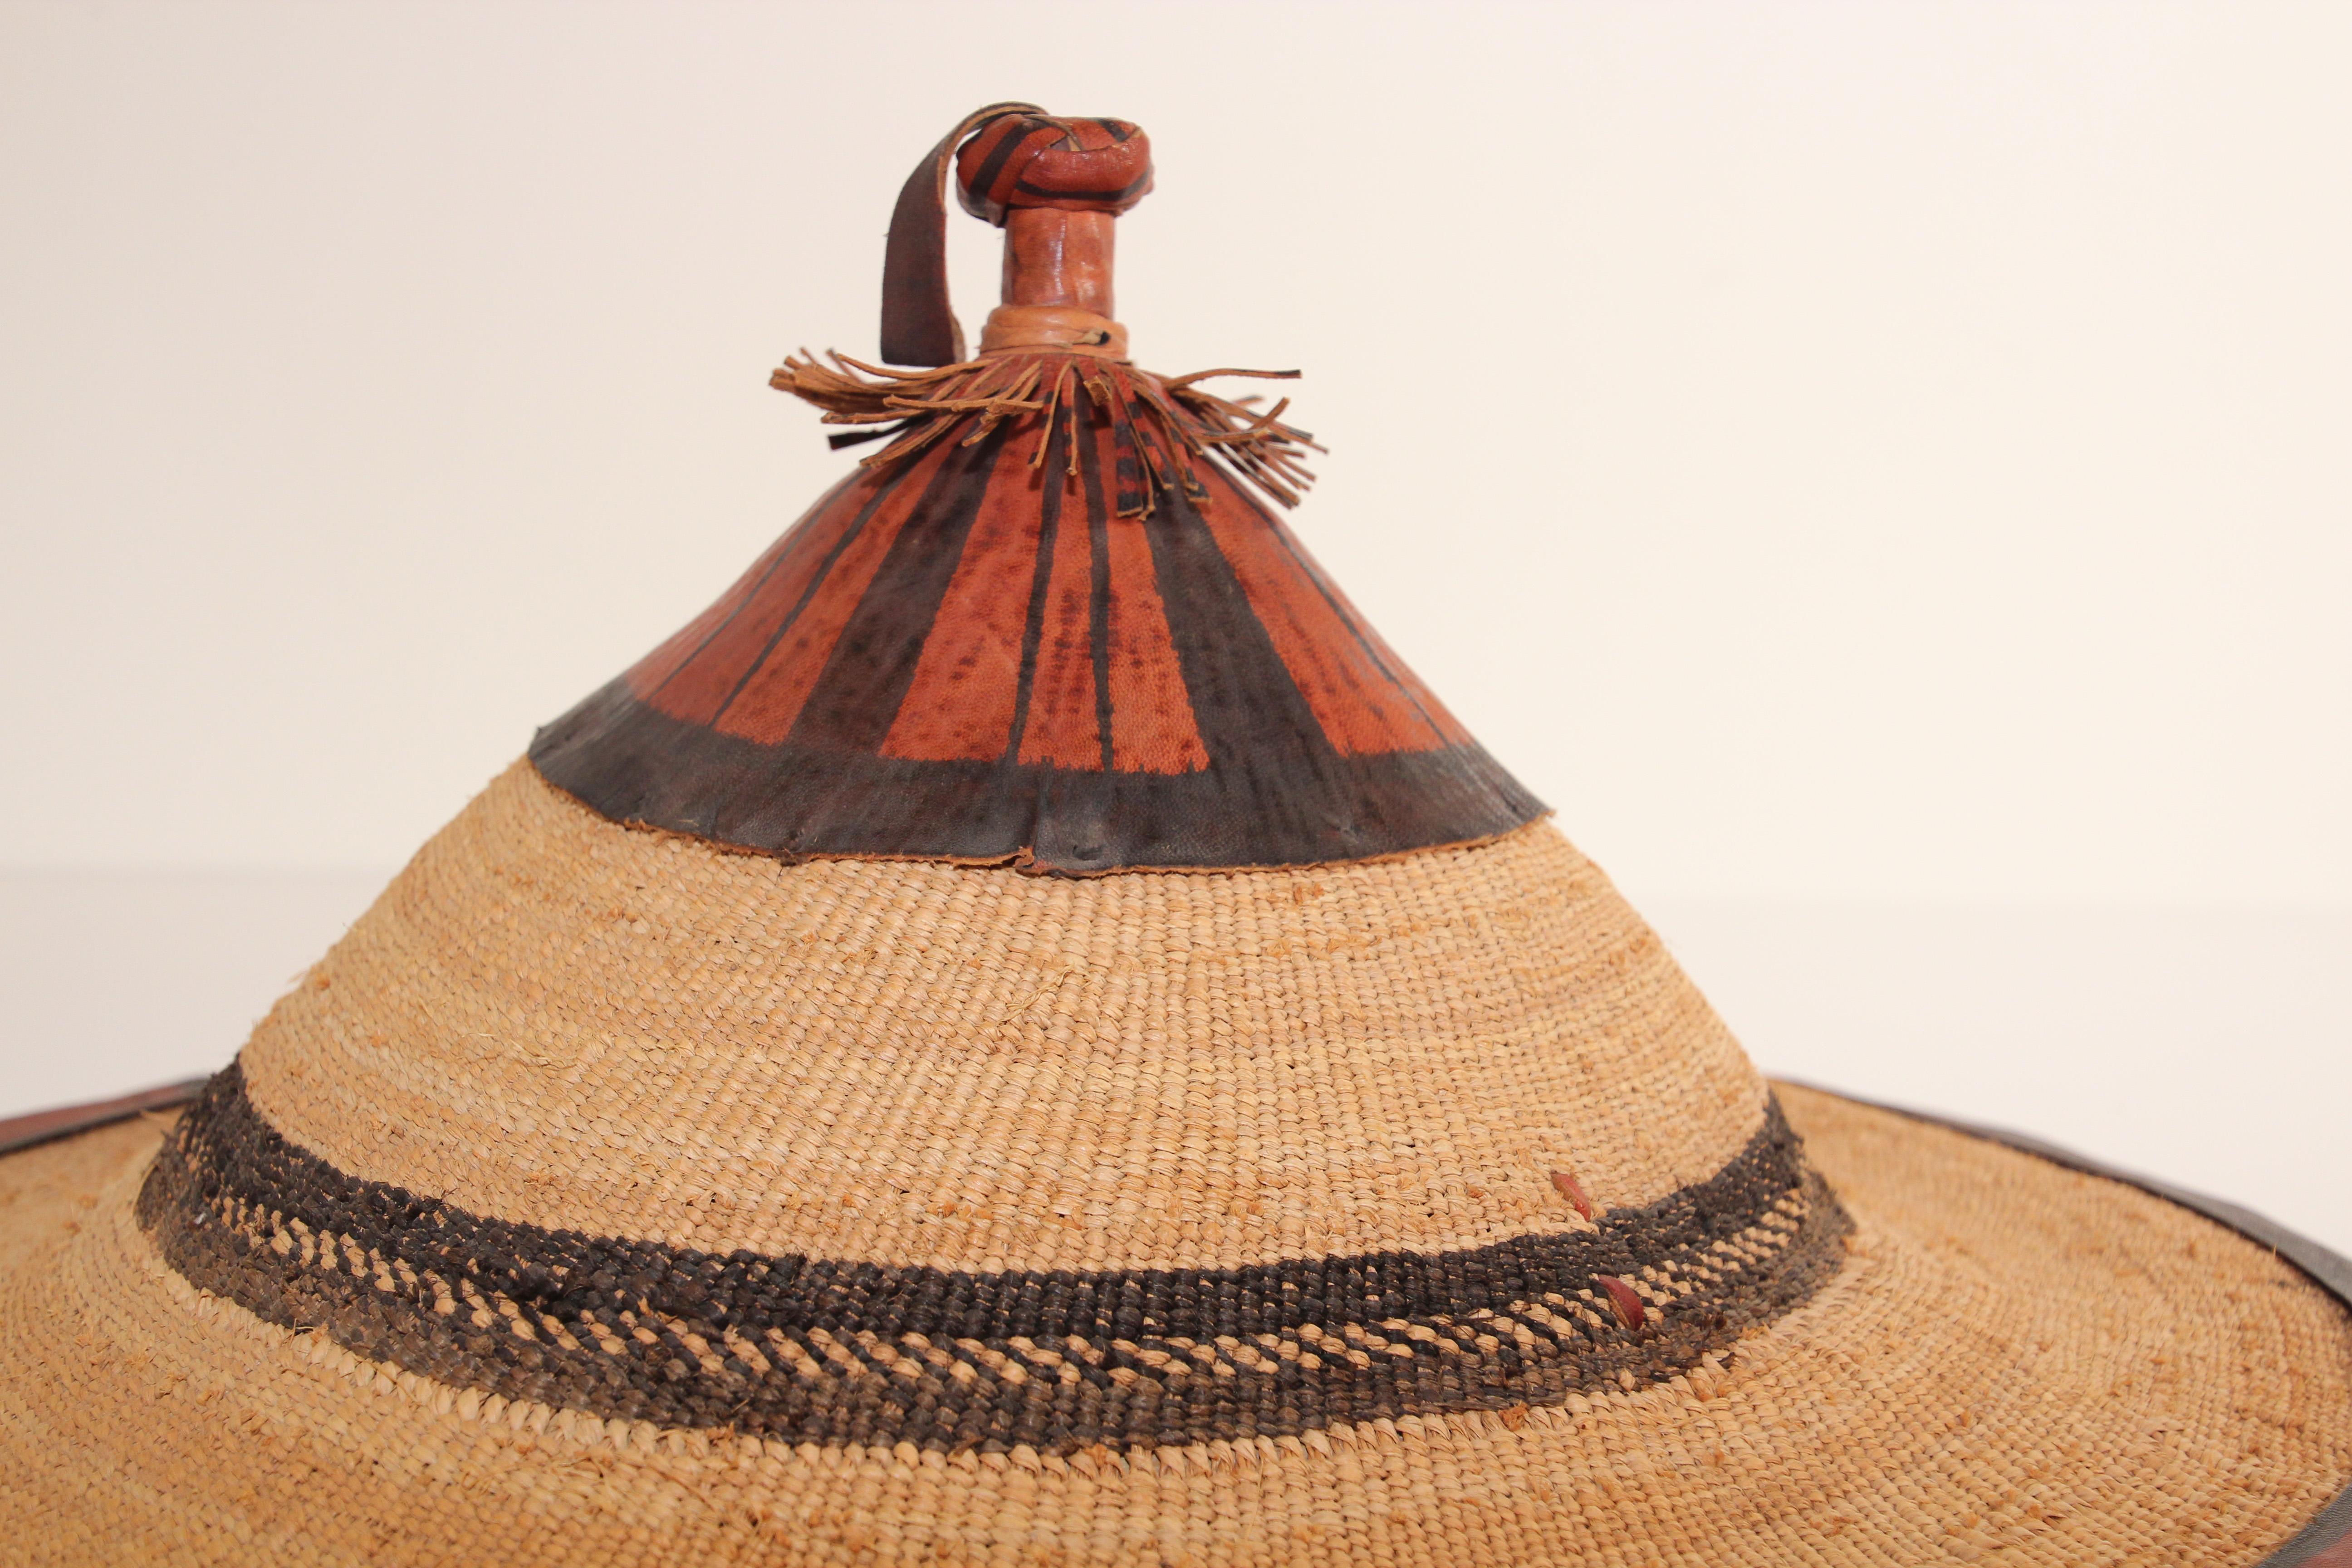 Mali West Africa Conical Leather and Straw Tribal Fulani Hat 6